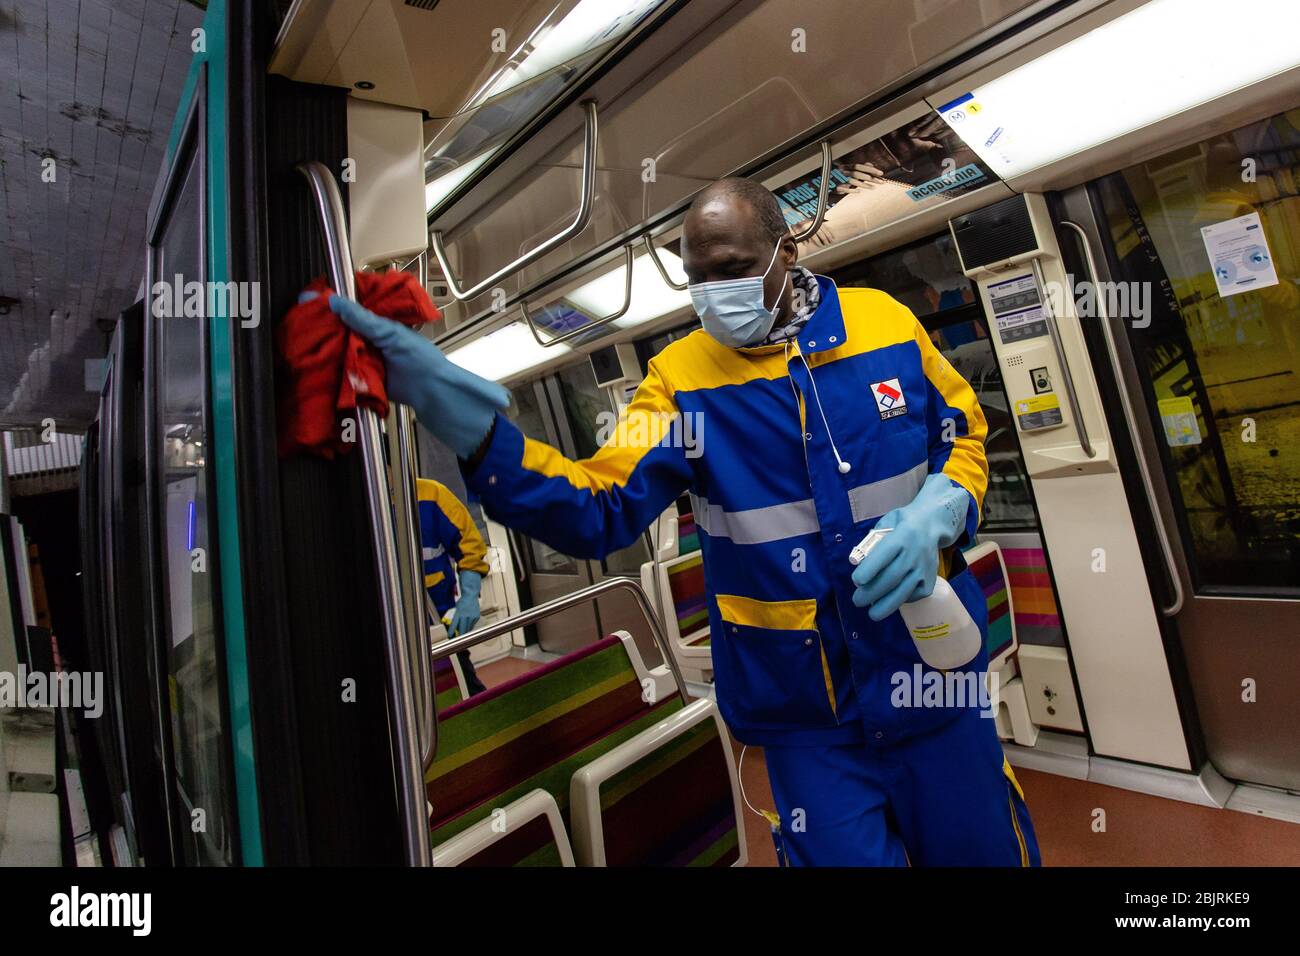 Paris, France. 30th Apr, 2020. Staff members of a private cleaning and disinfection company disinfect metro trains in Vincennes near Paris, France, April 30, 2020. Two weeks ahead of the exit plan being put into motion, France's coronavirus death toll rose to 24,087 while hospitalizations and patients in intensive care continued to decline on Wednesday. Credit: Aurelien Morissard/Xinhua/Alamy Live News Stock Photo